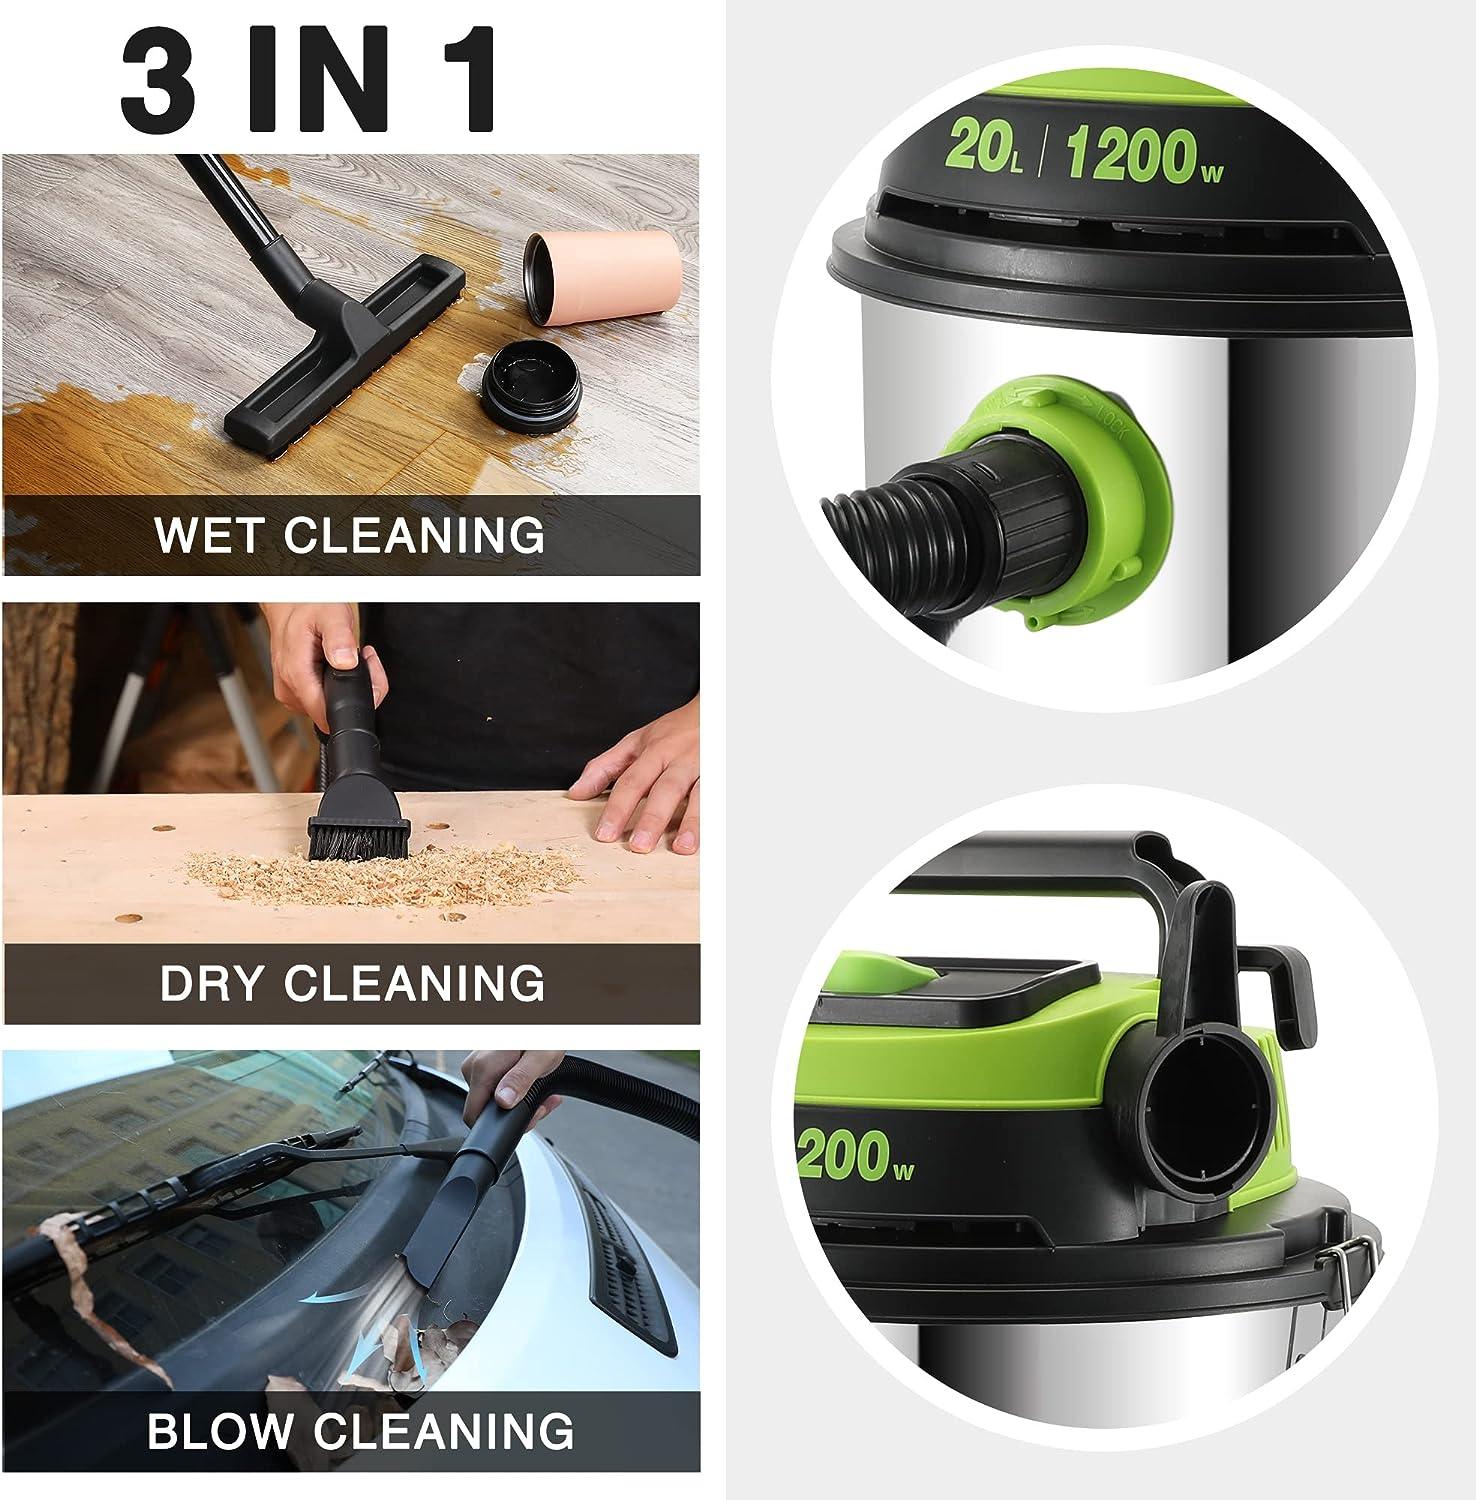 WORKPRO Wet and Dry Vacuum Cleaner with Hepa Filter 20L 1200W, 3 in 1 - Massive Discounts